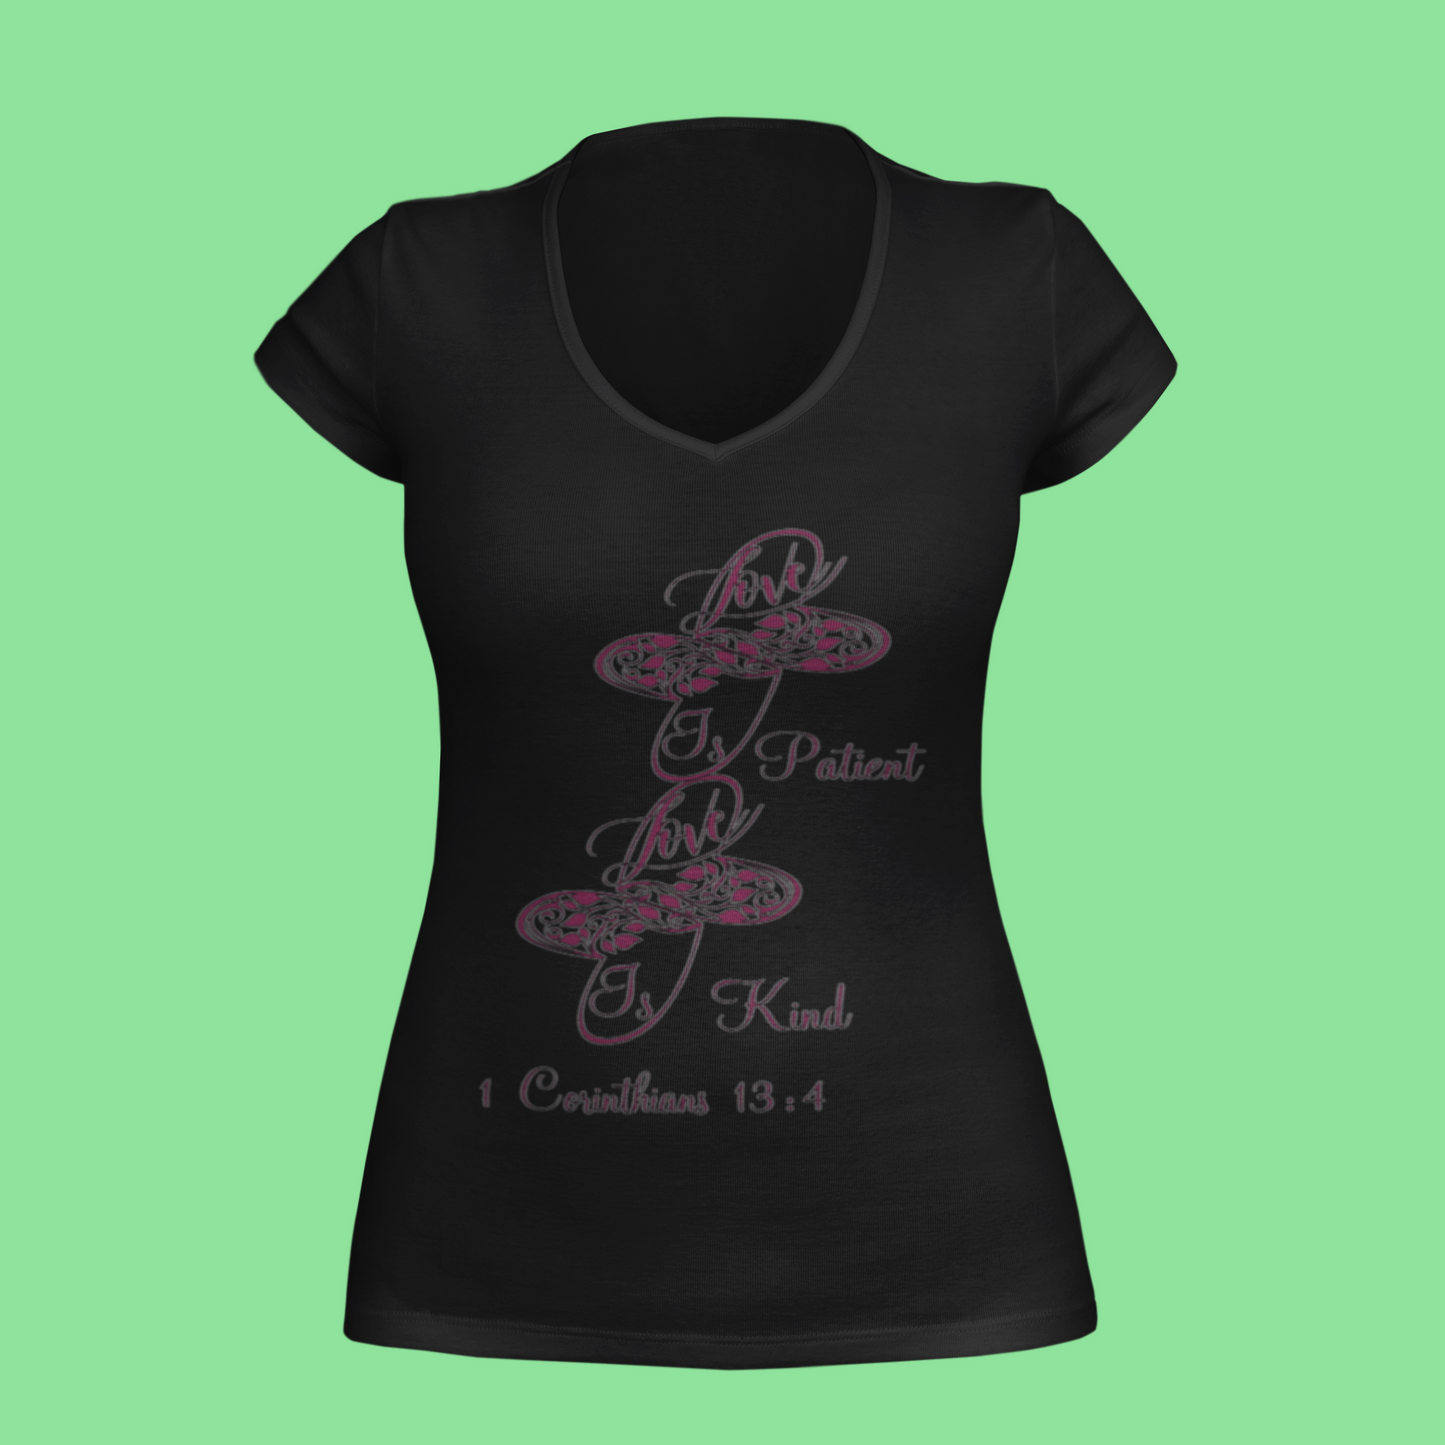 God's Love Collection Women's Scoop Neck T-Shirt 1 Corthin 13:4 Option 2